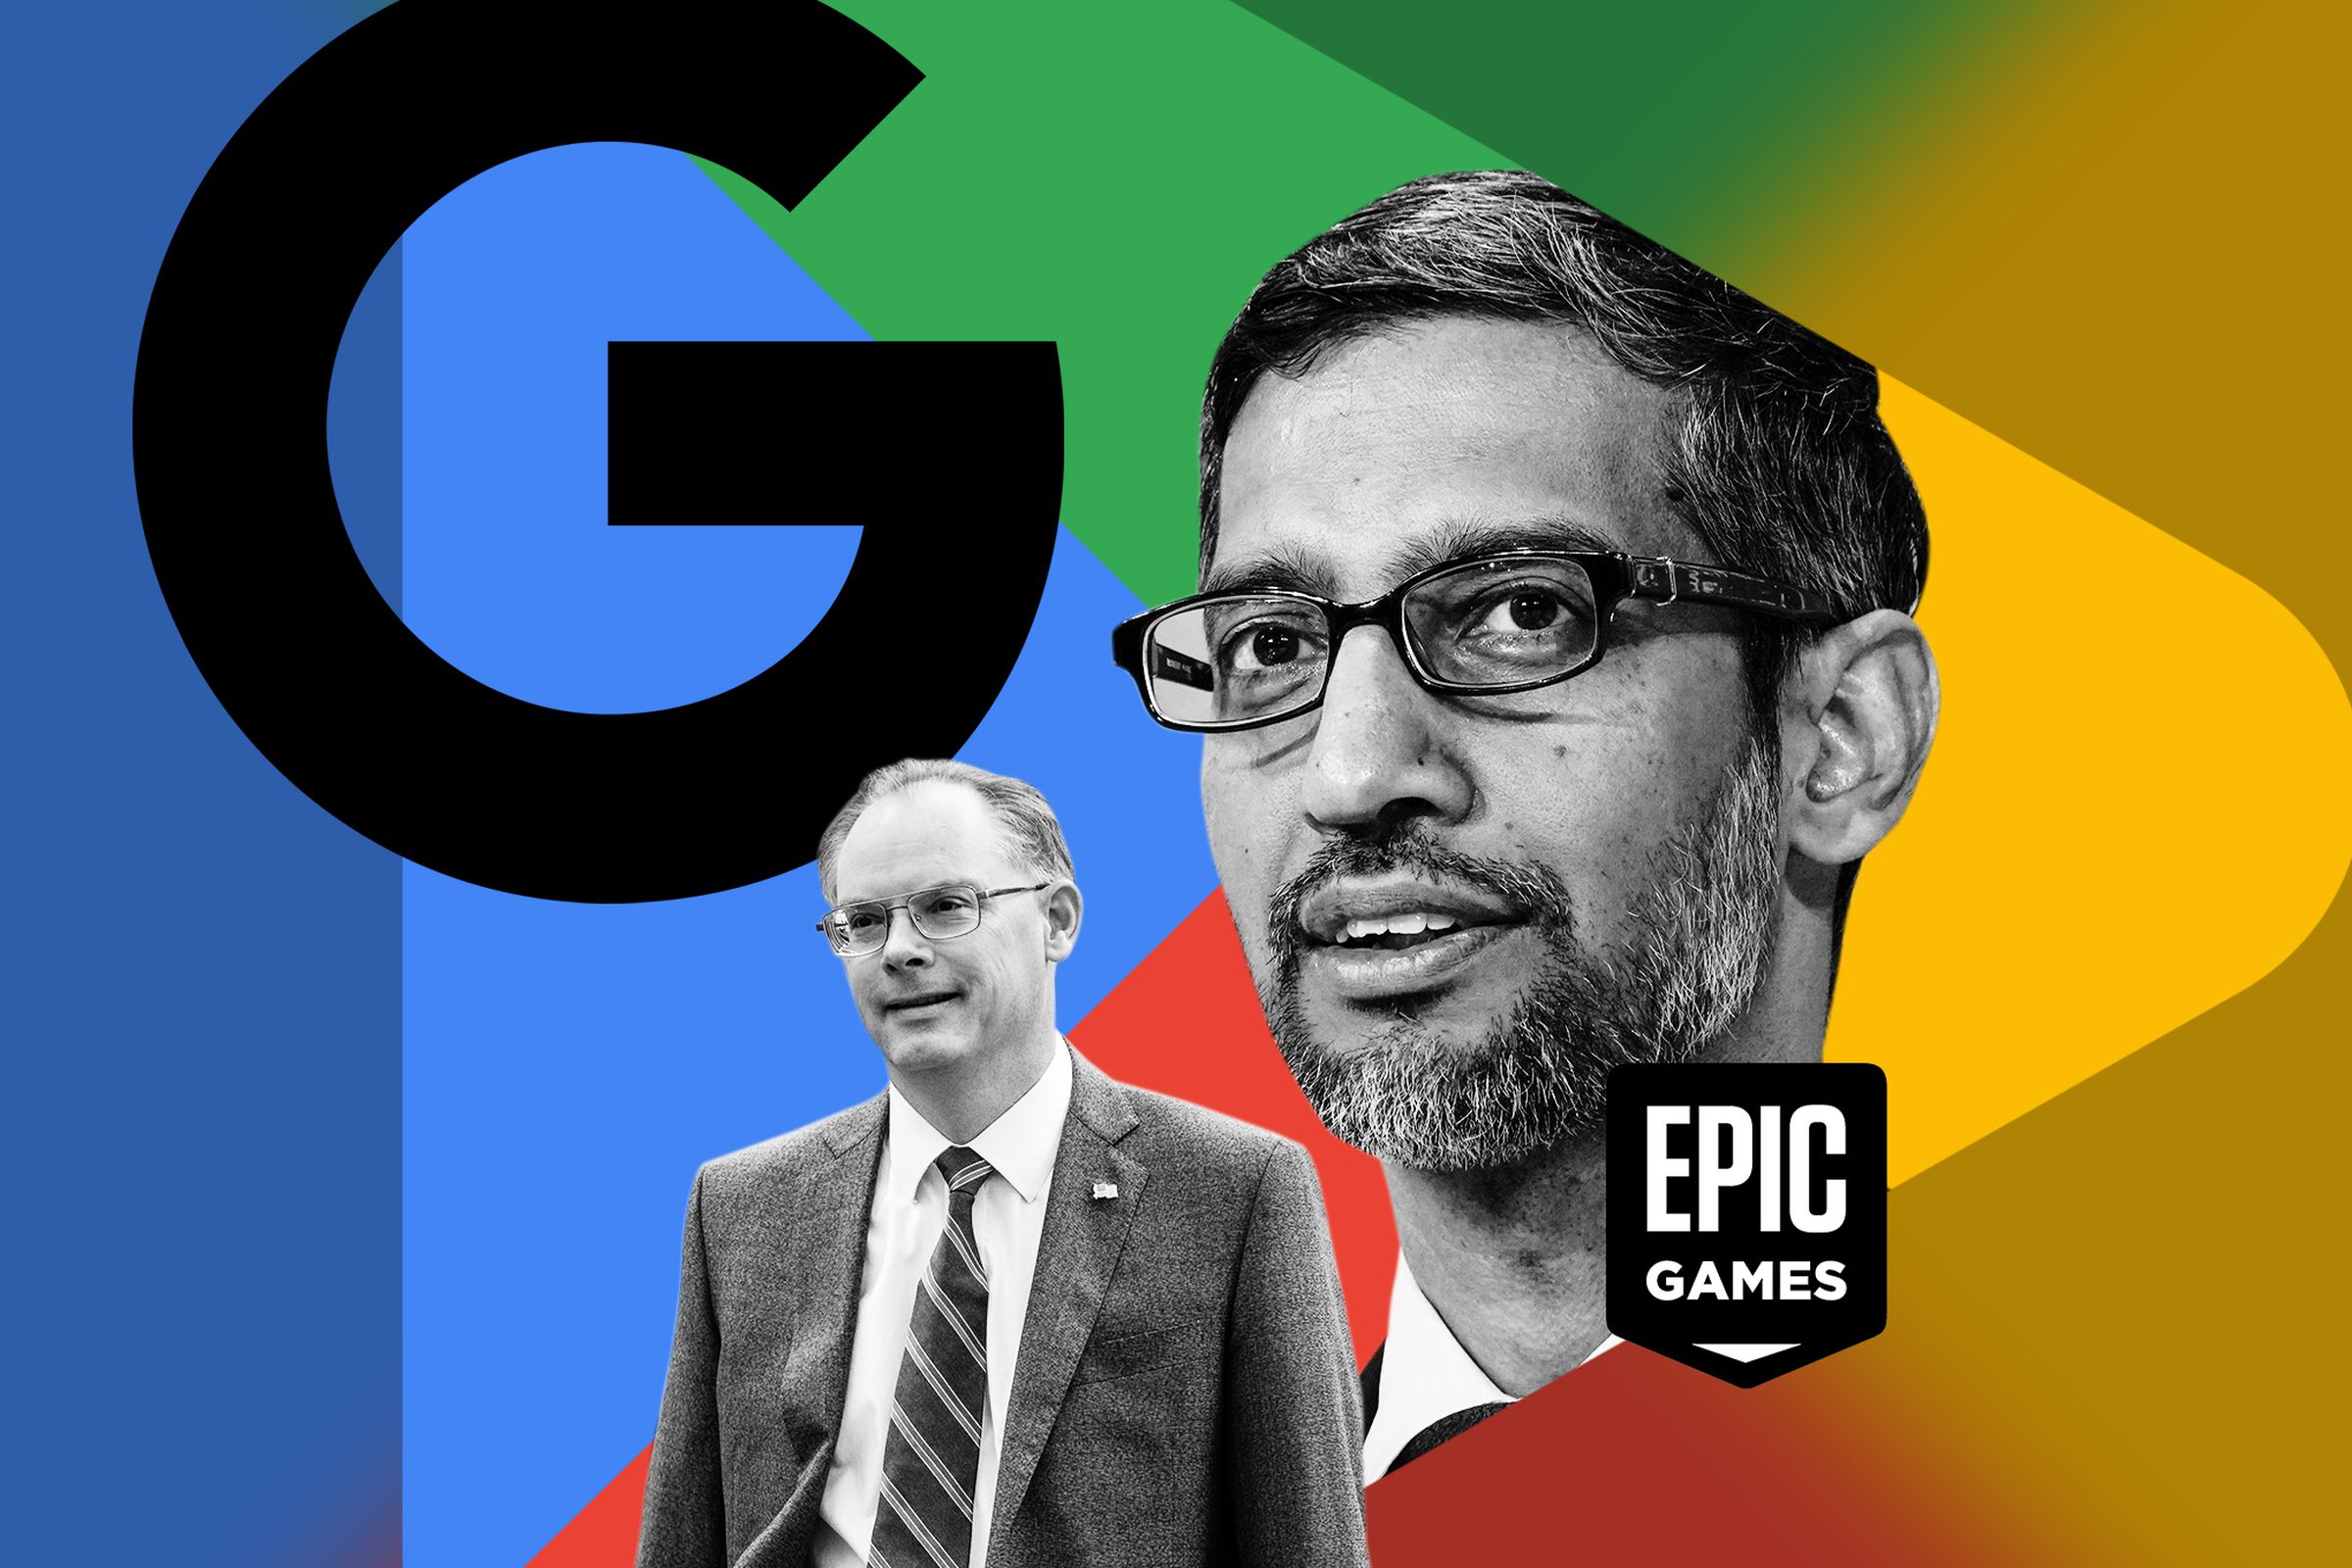 Photo illustration of Sundar Pichai and Tim Sweeney with the Google logo, Google Play logo, and the Epic Games logo.